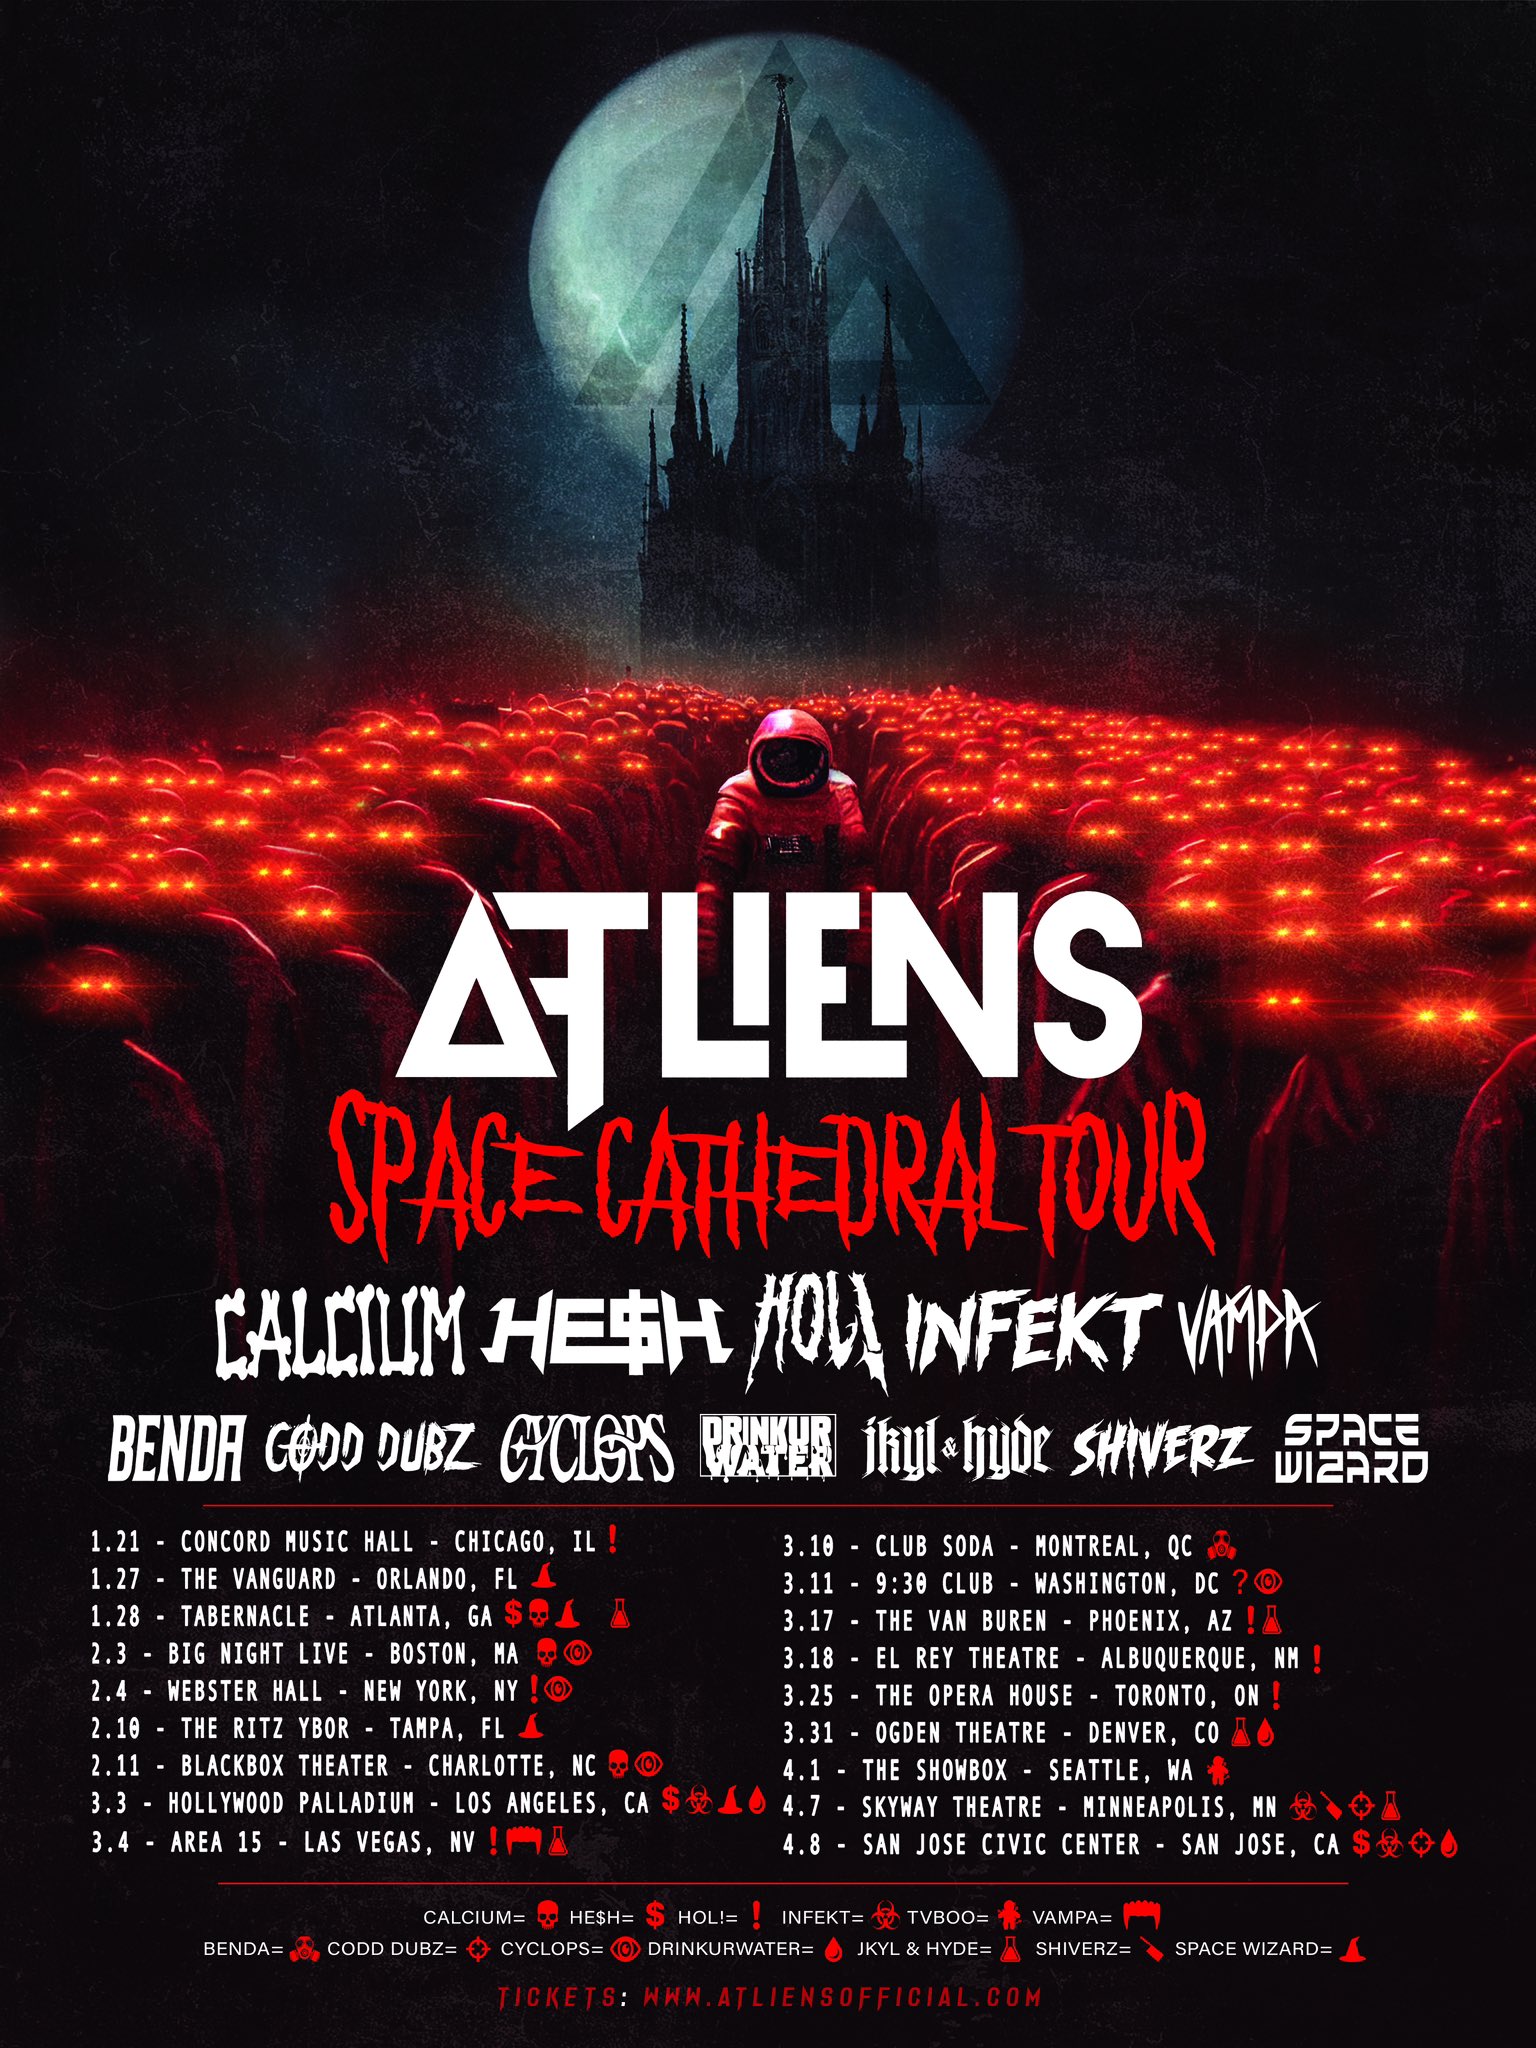 atliens-space-cathedral-tour-orlando